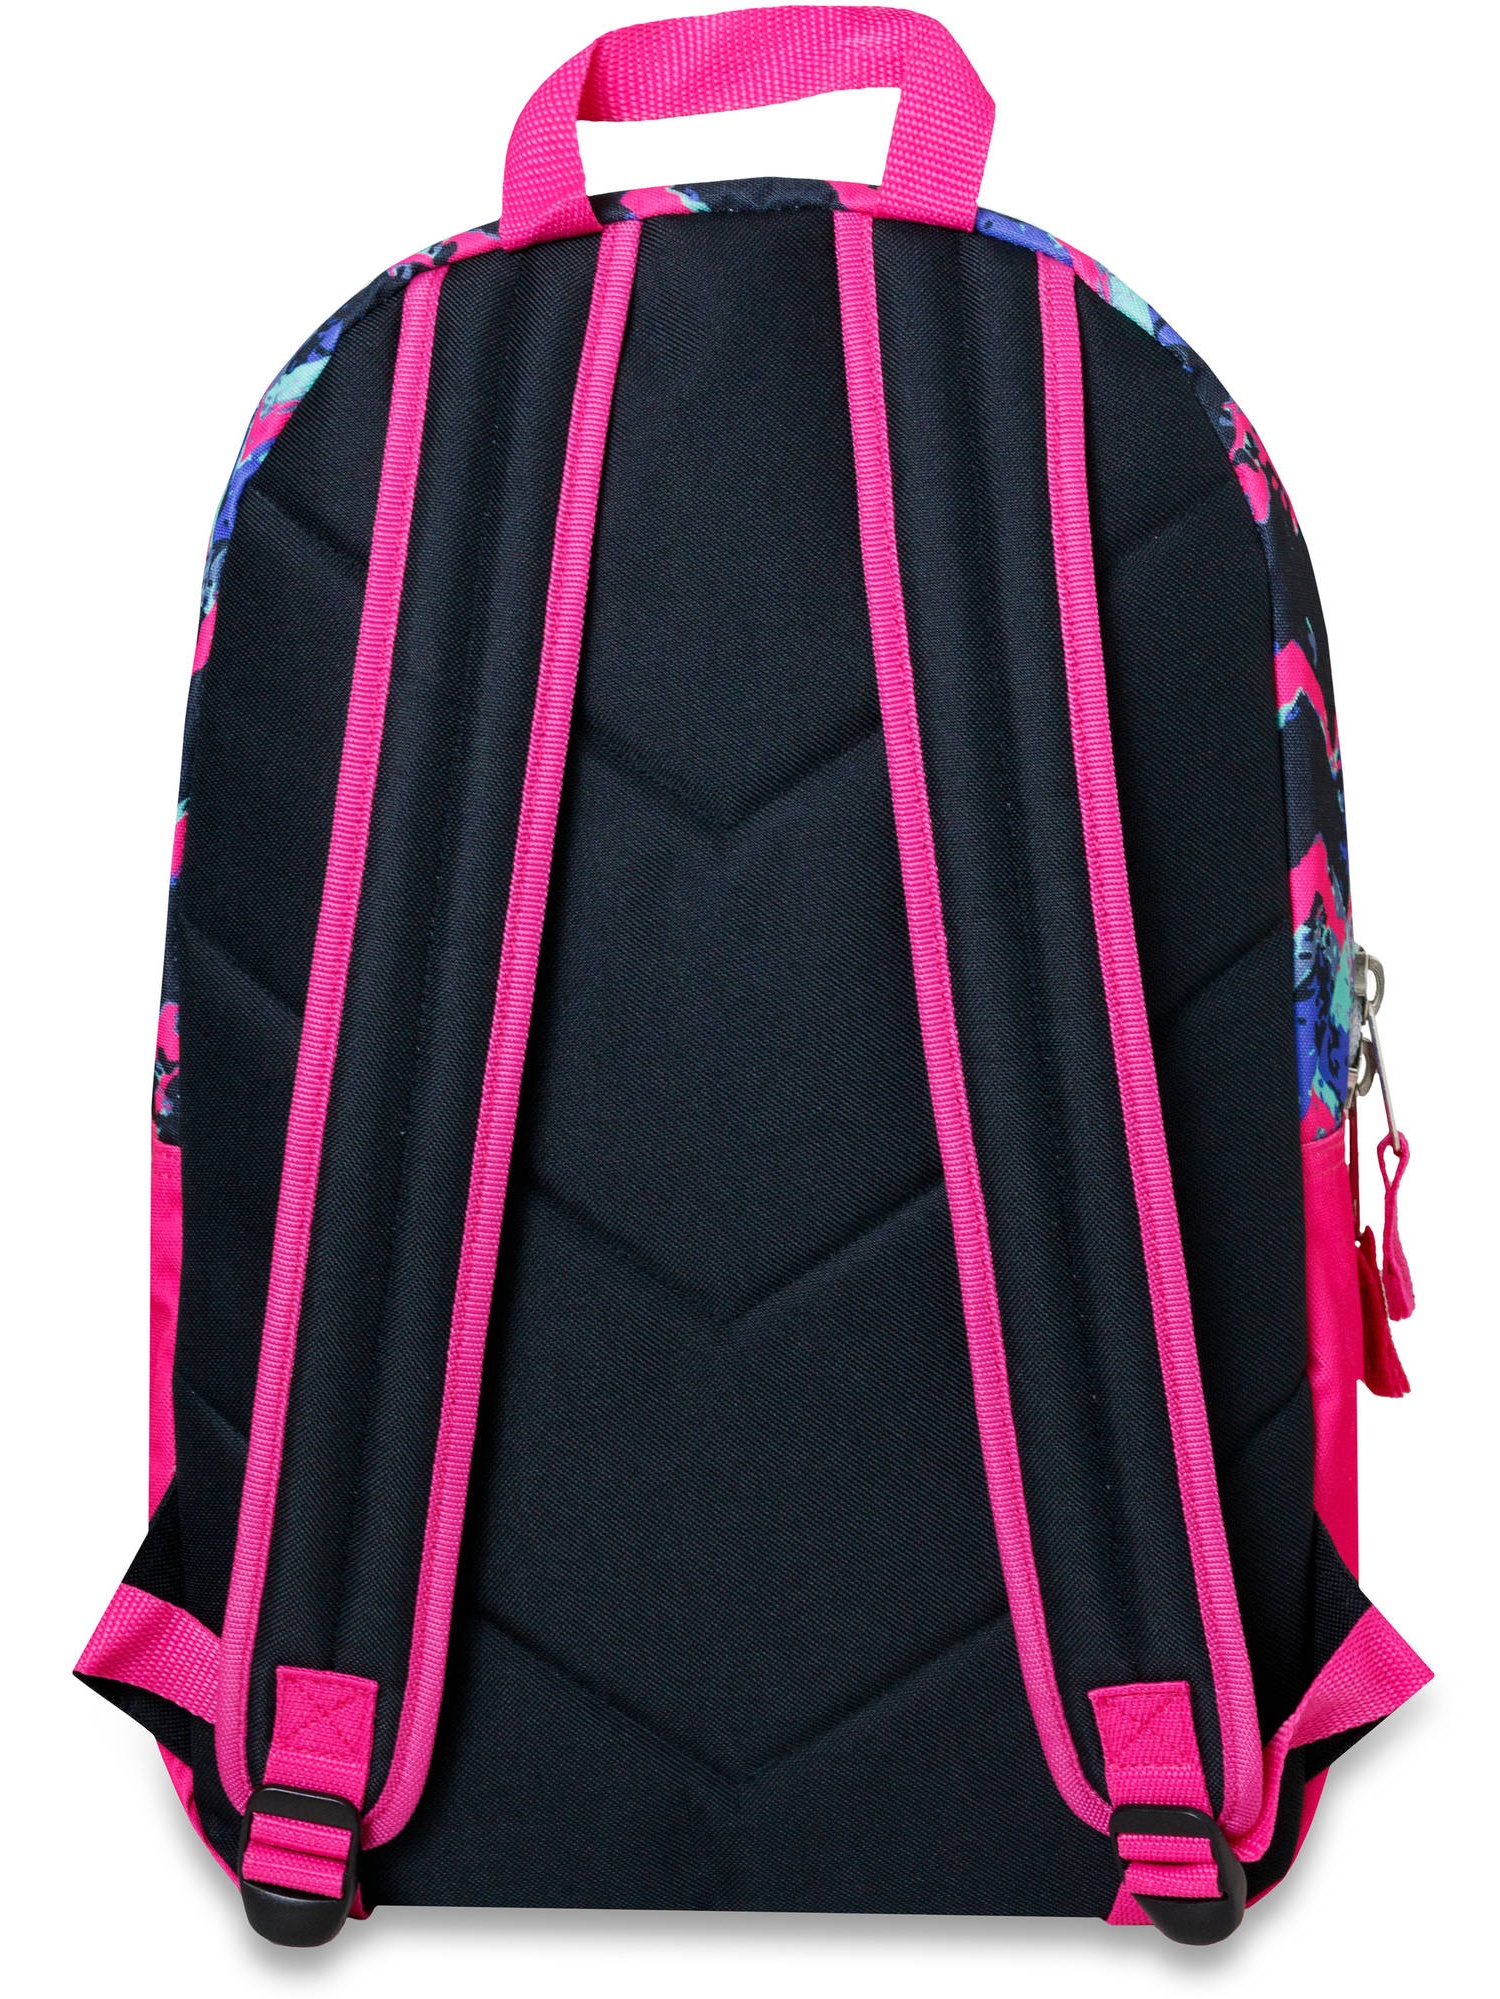 17 Inch Chevron Printed Backpack with Front Accessory Pocket - image 2 of 3